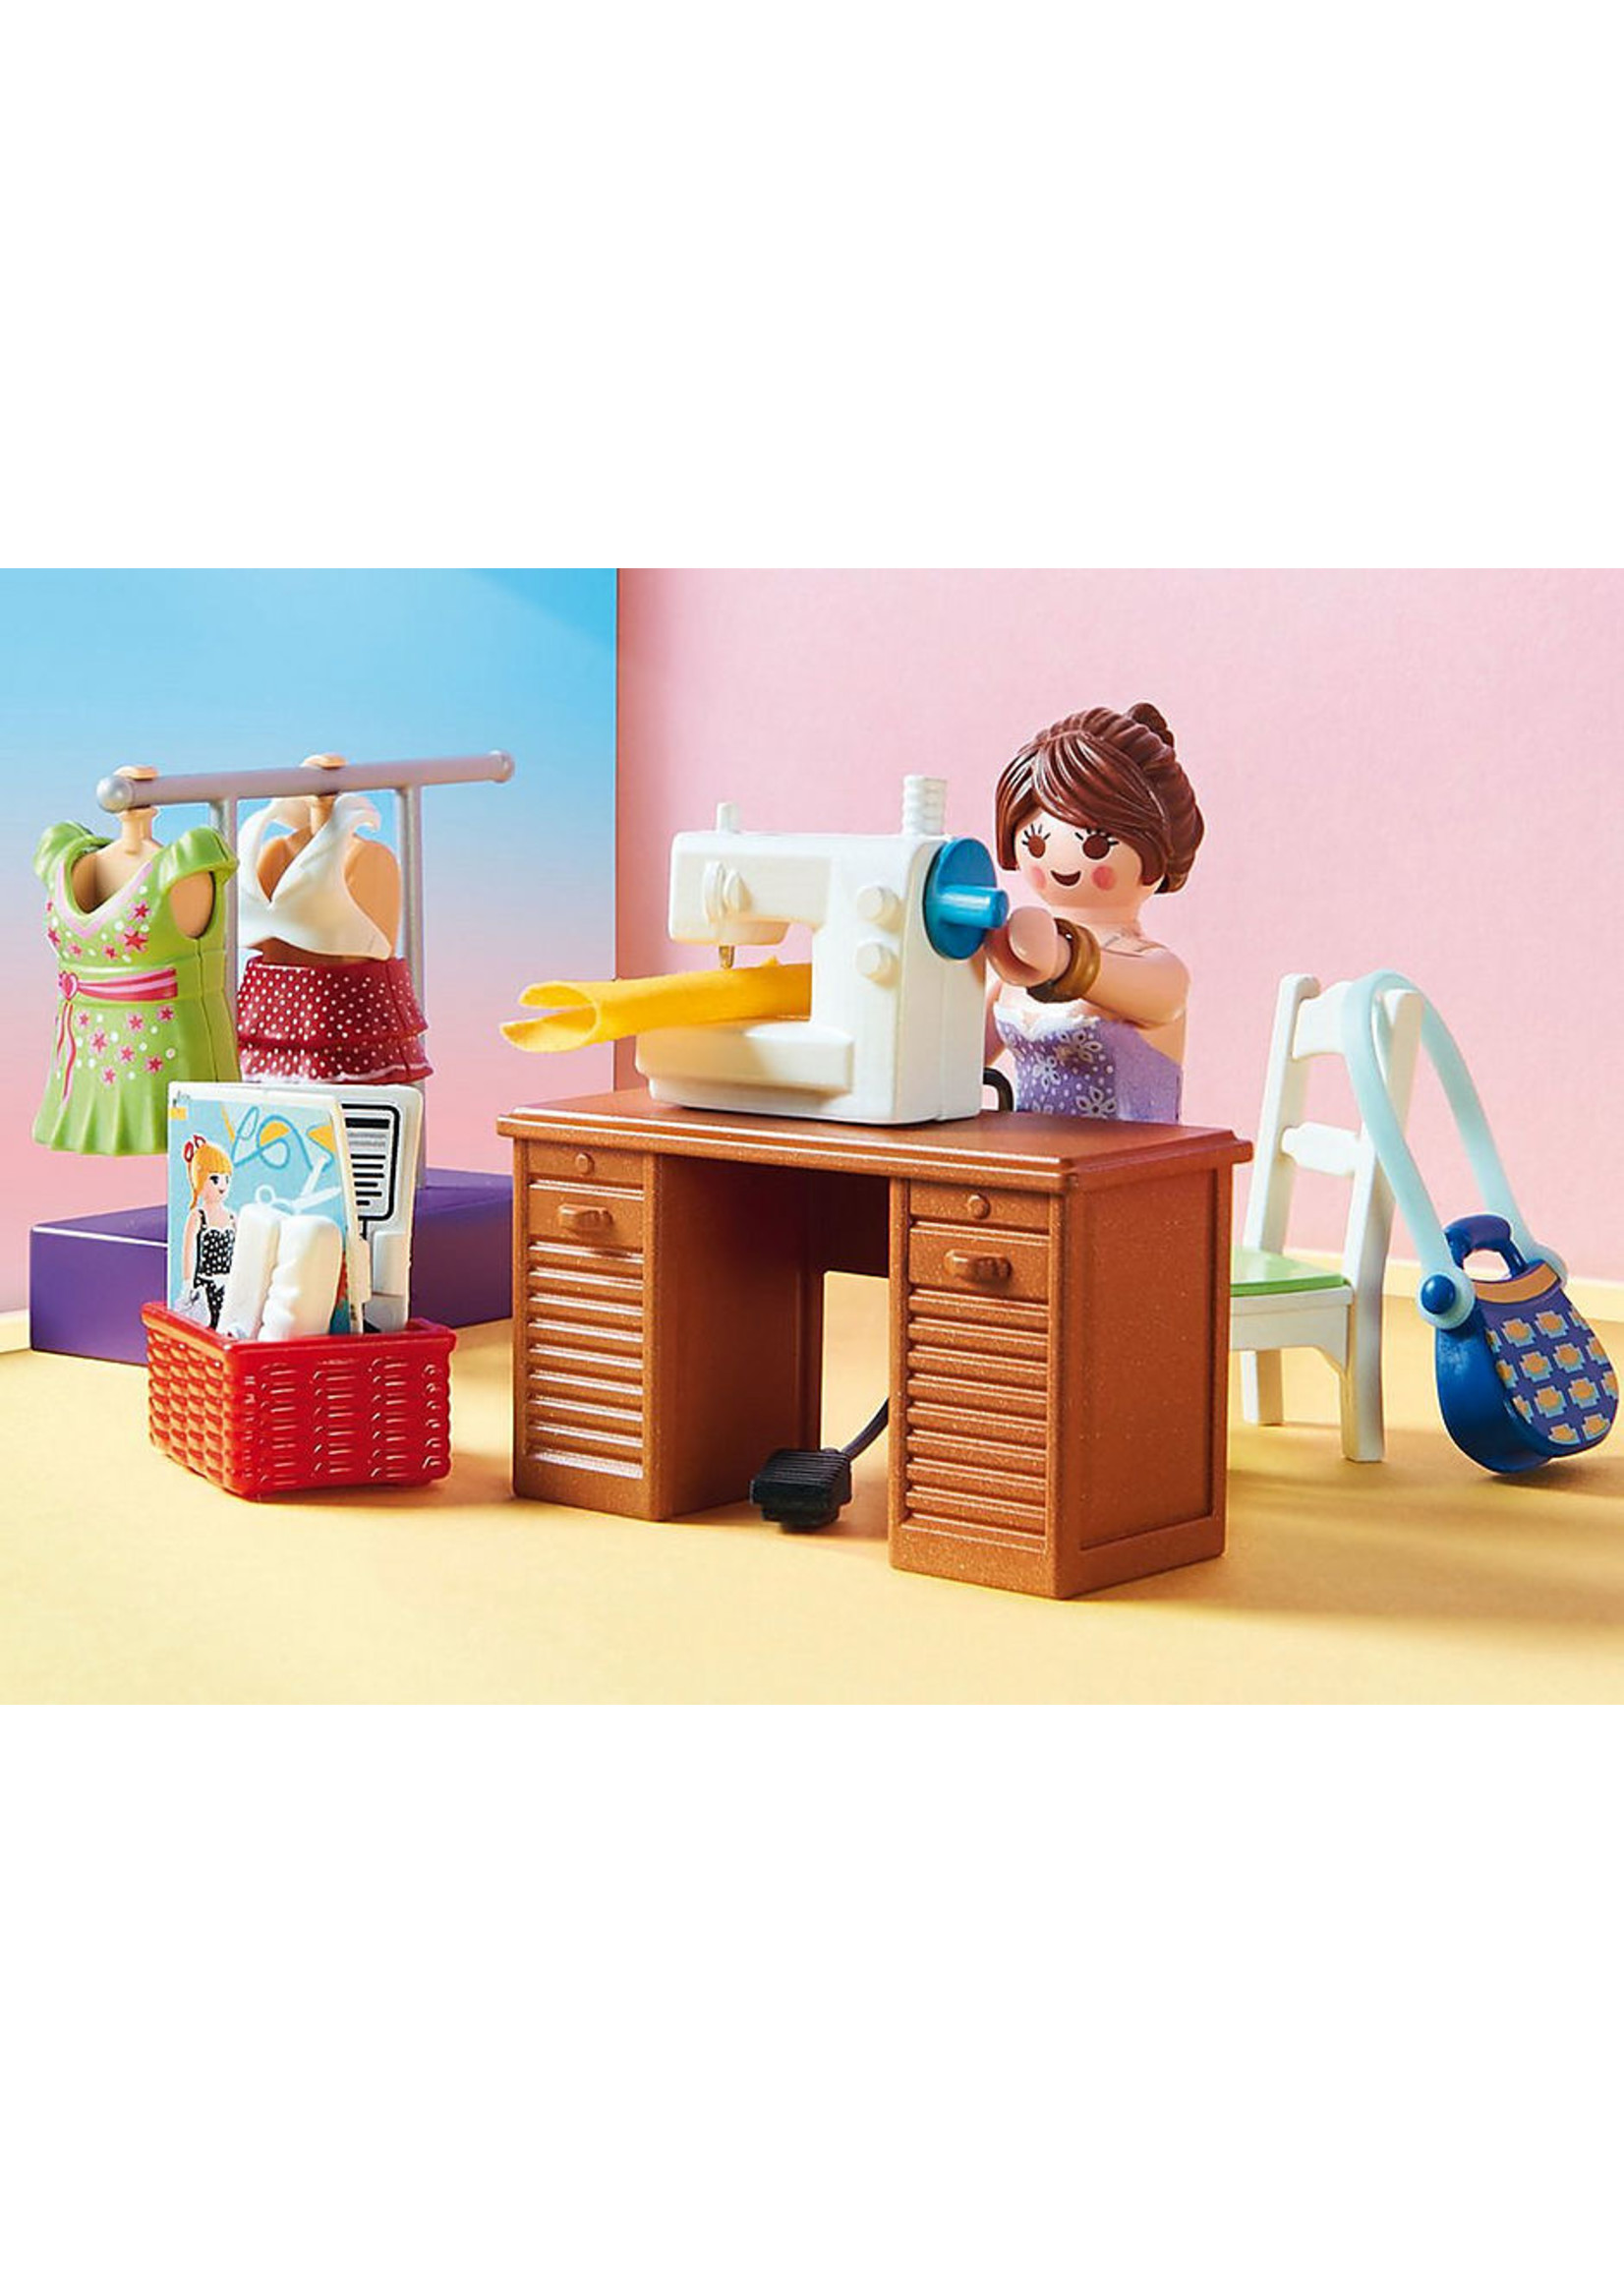 Playmobil 70208 - Bedroom with Sewing Corner